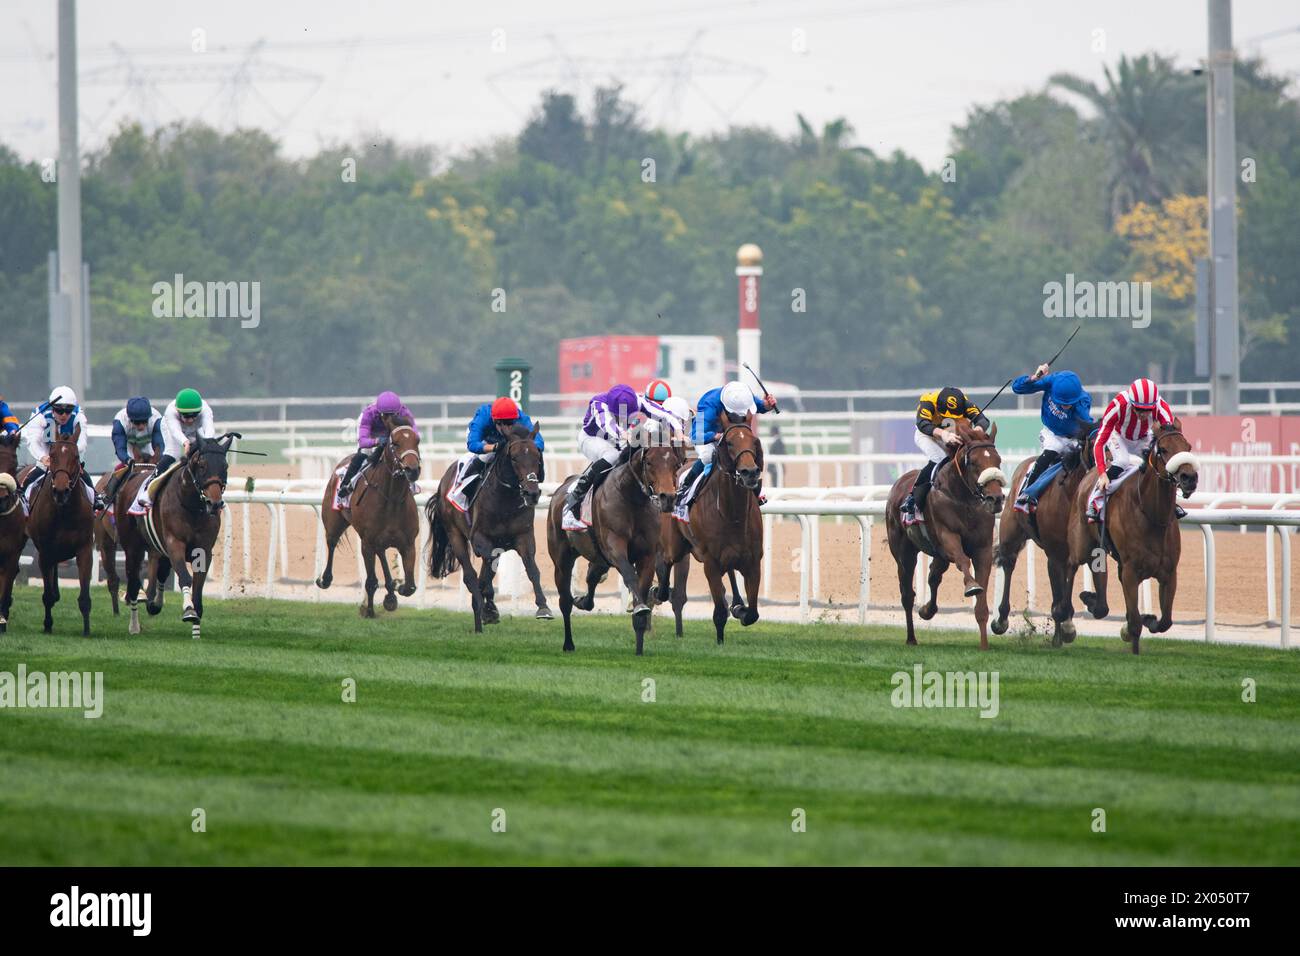 Tower of London and Ryan Moore win the 2024 renewal of the G2 Dubai Gold Cup for trainer Aidan O'Brien, 30/03/24. Credit JTW Equine Images / Alamy. Stock Photo